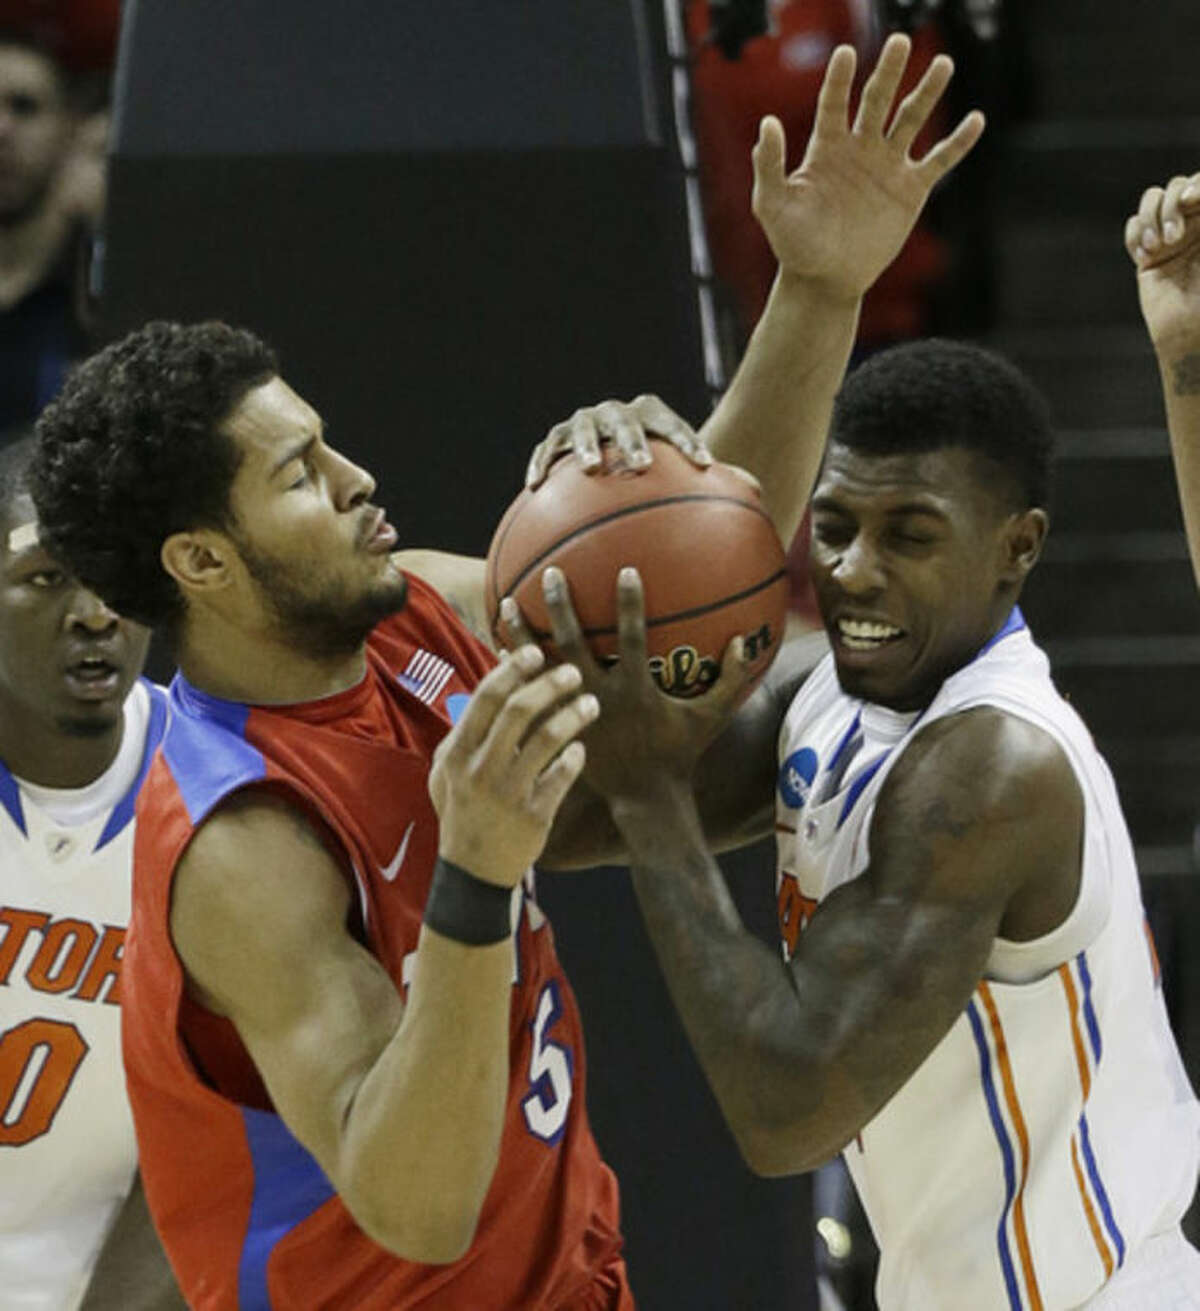 Florida forward Casey Prather (24) holds the ball as Dayton forward Devin Oliver (5) defends during the second half in a regional final game at the NCAA college basketball tournament, Saturday, March 29, 2014, in Memphis, Tenn. (AP Photo/Mark Humphrey)